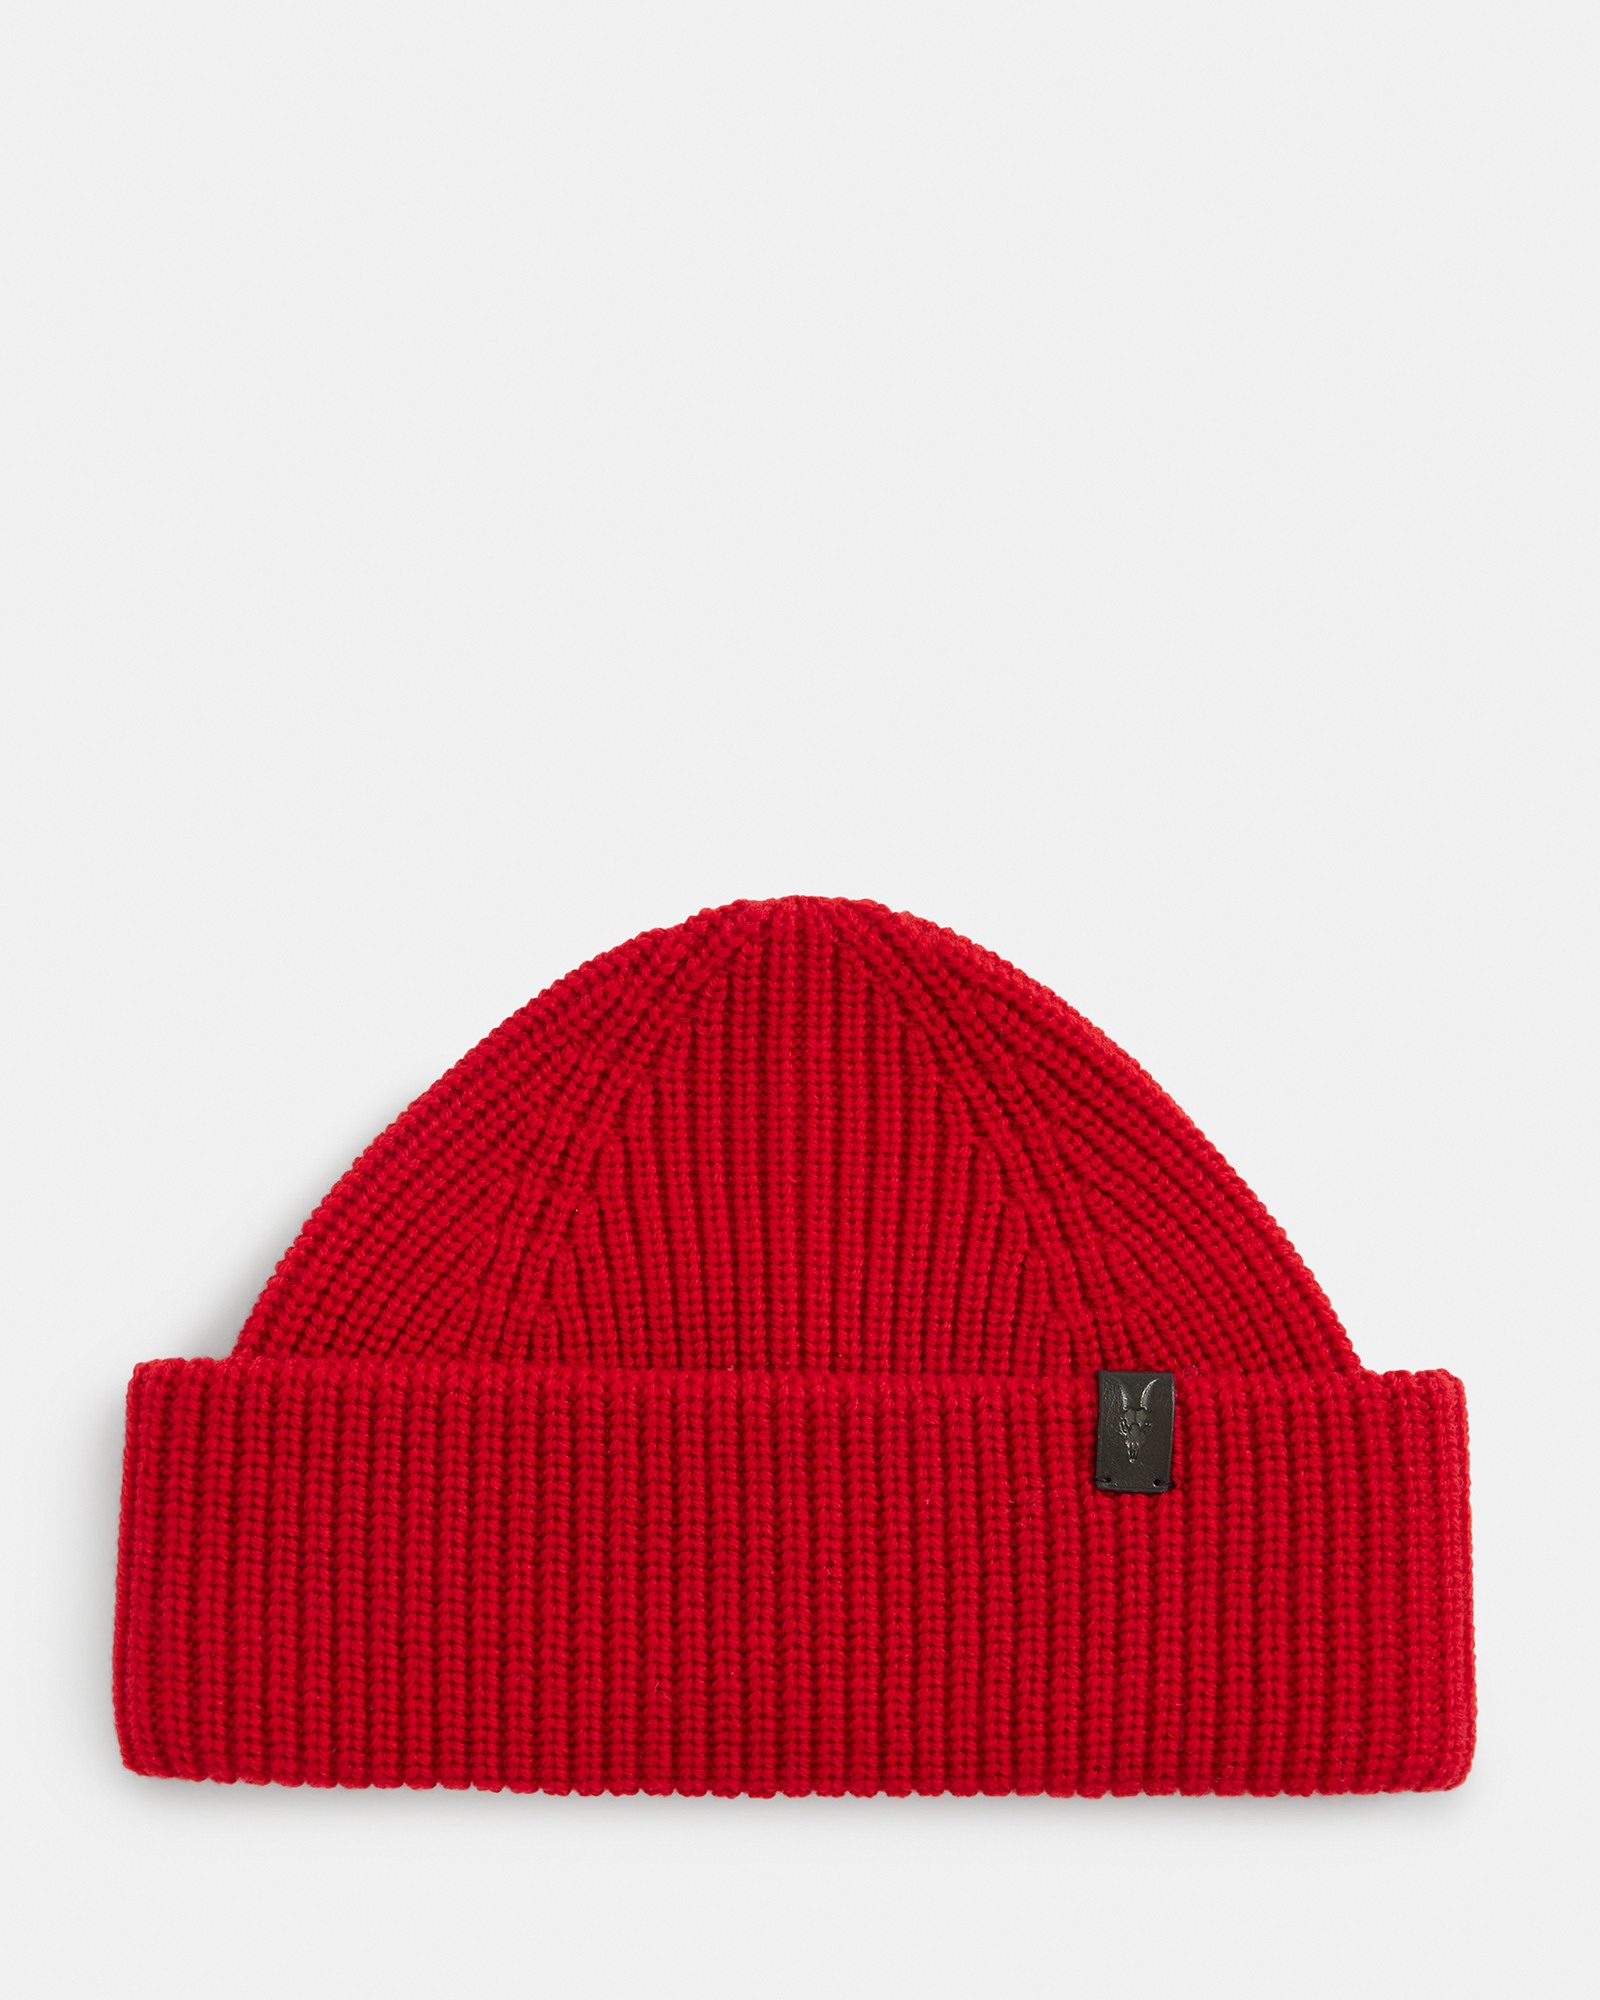 Merino Up | ALLSAINTS US Cuff Wool Beanie PYROPE Turned RED